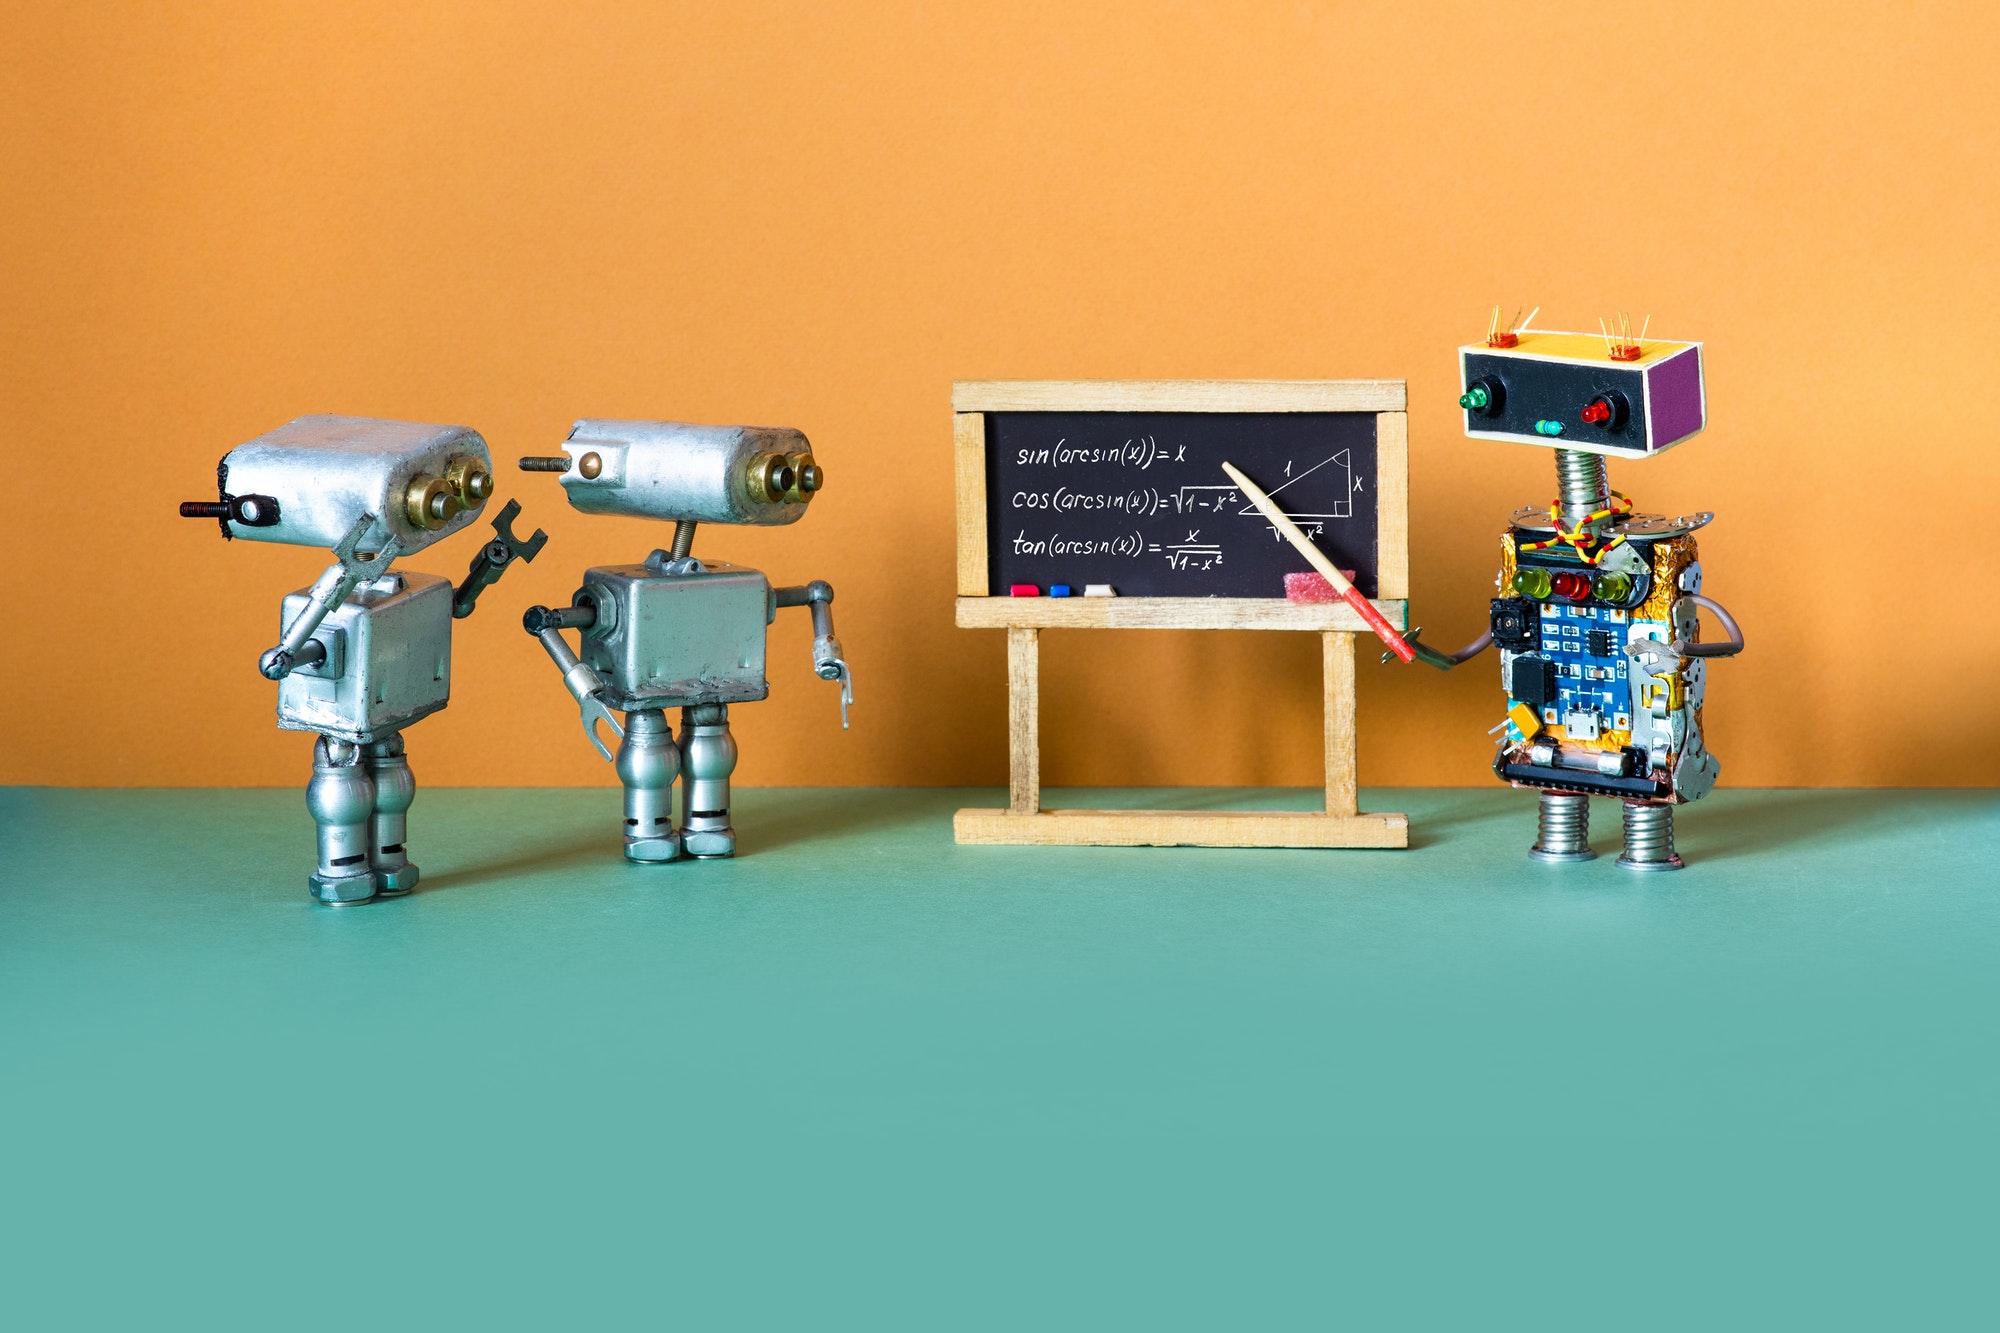 Artificial intelligence machine learning and robotics education concept